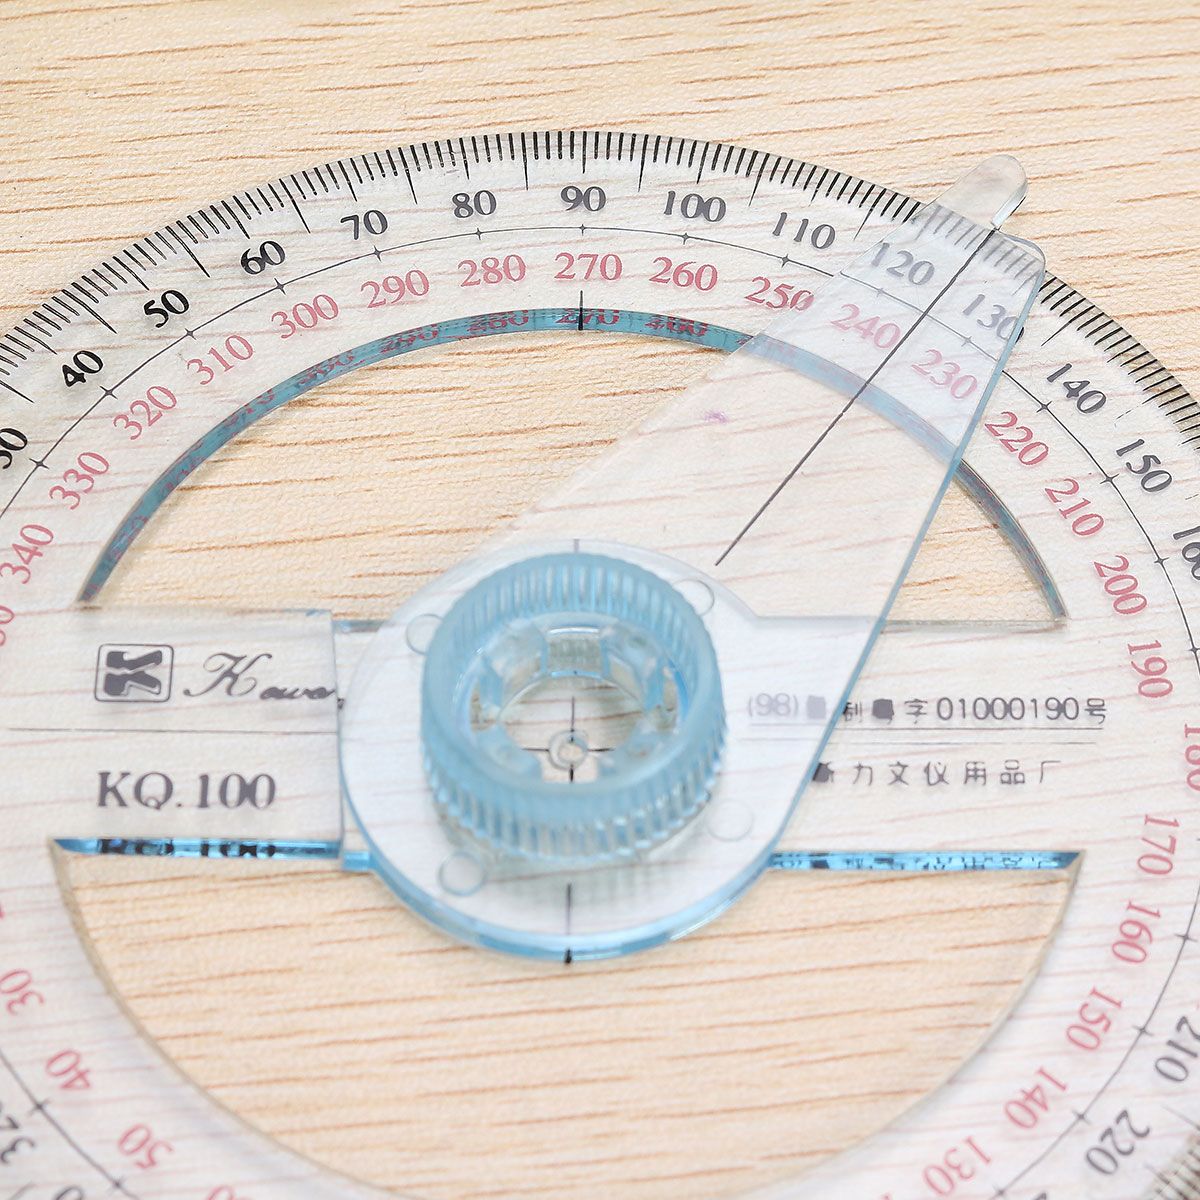 10cm-Plastic-360-Degree-Protractor-Ruler-Angle-Finder-Swing-Arm-School-Office-1052393